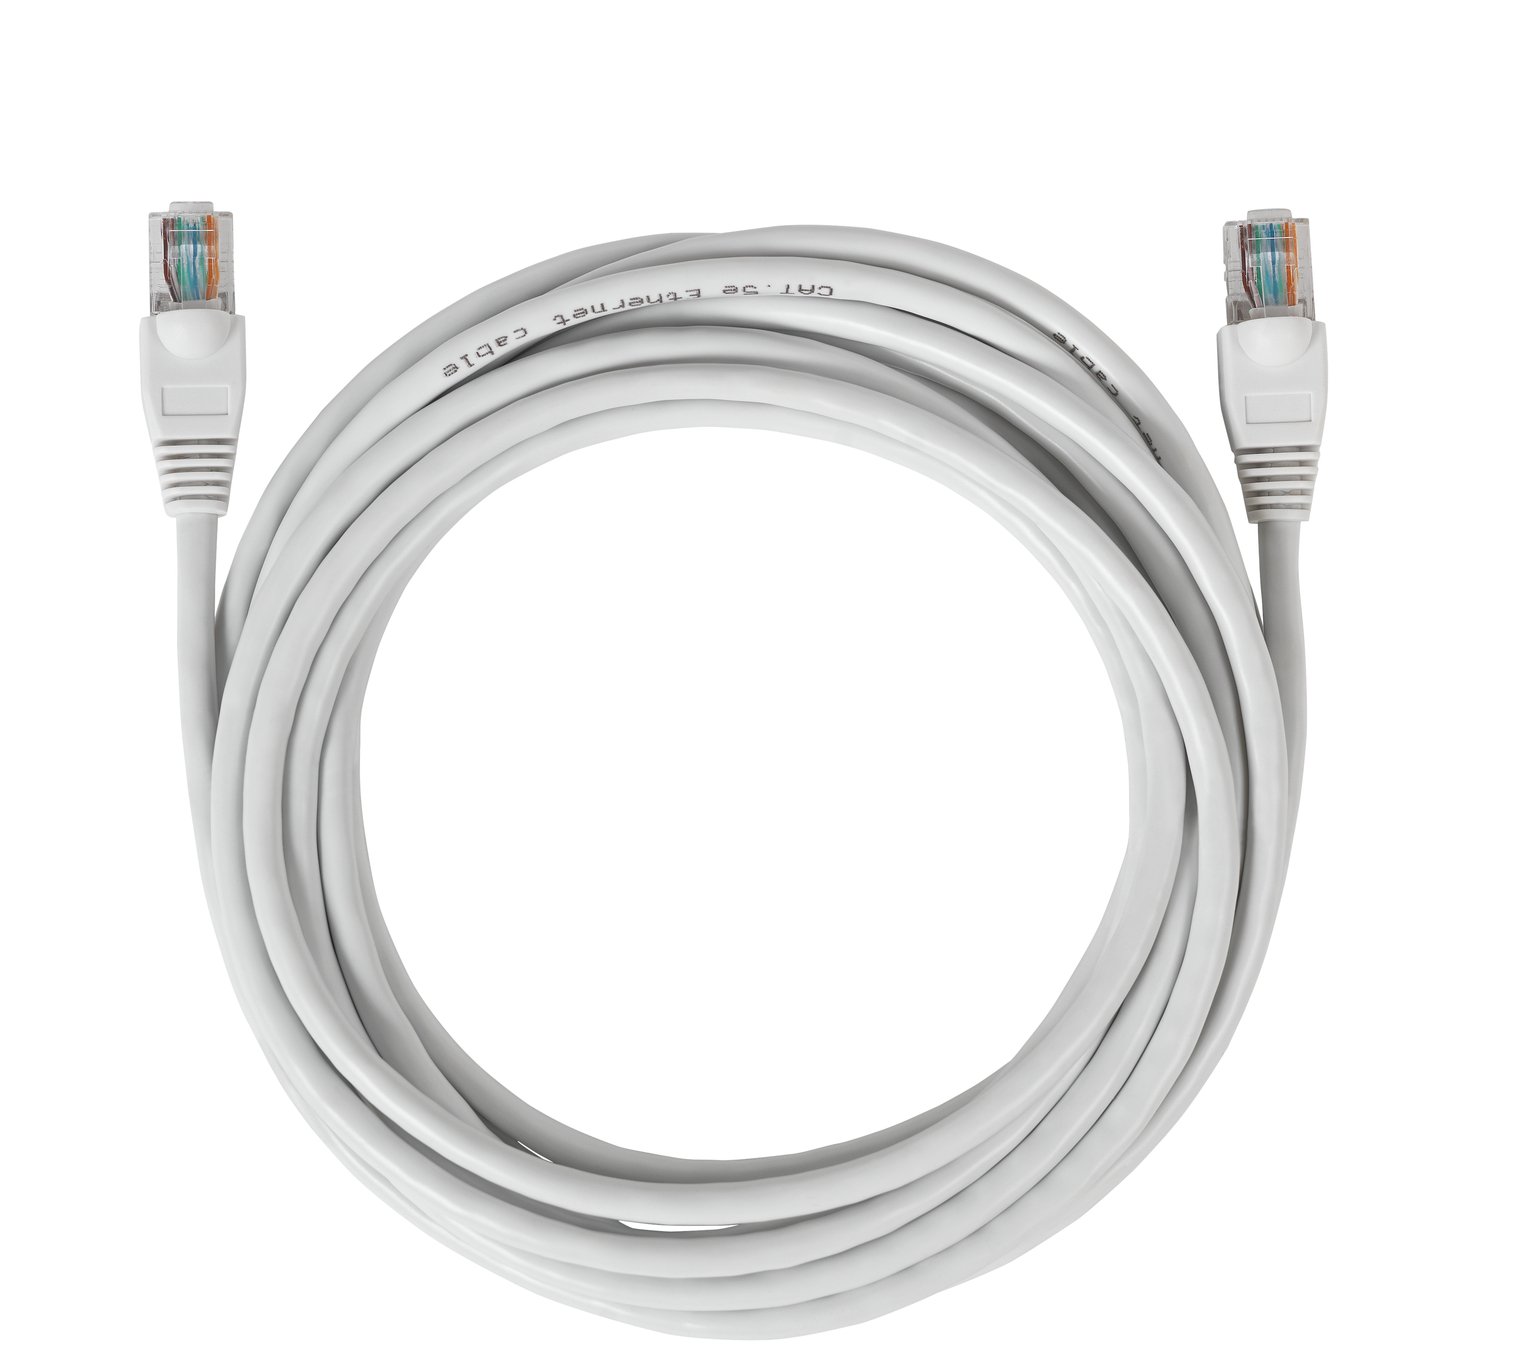 5m Ethernet Cable Review